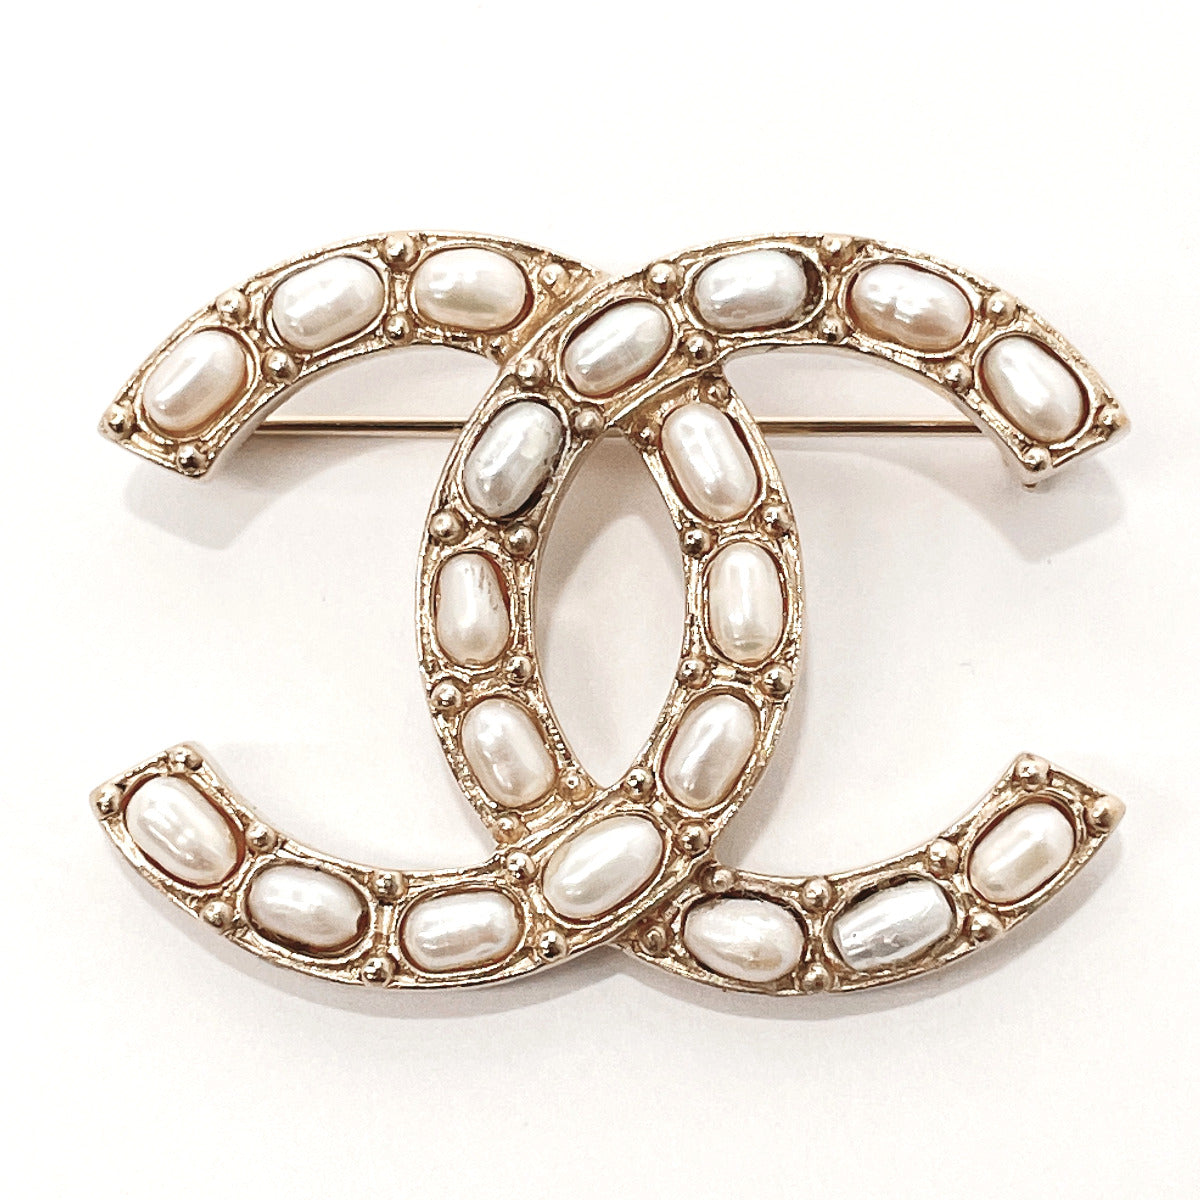 Cc pin & brooche Chanel Gold in Metal - 29202789